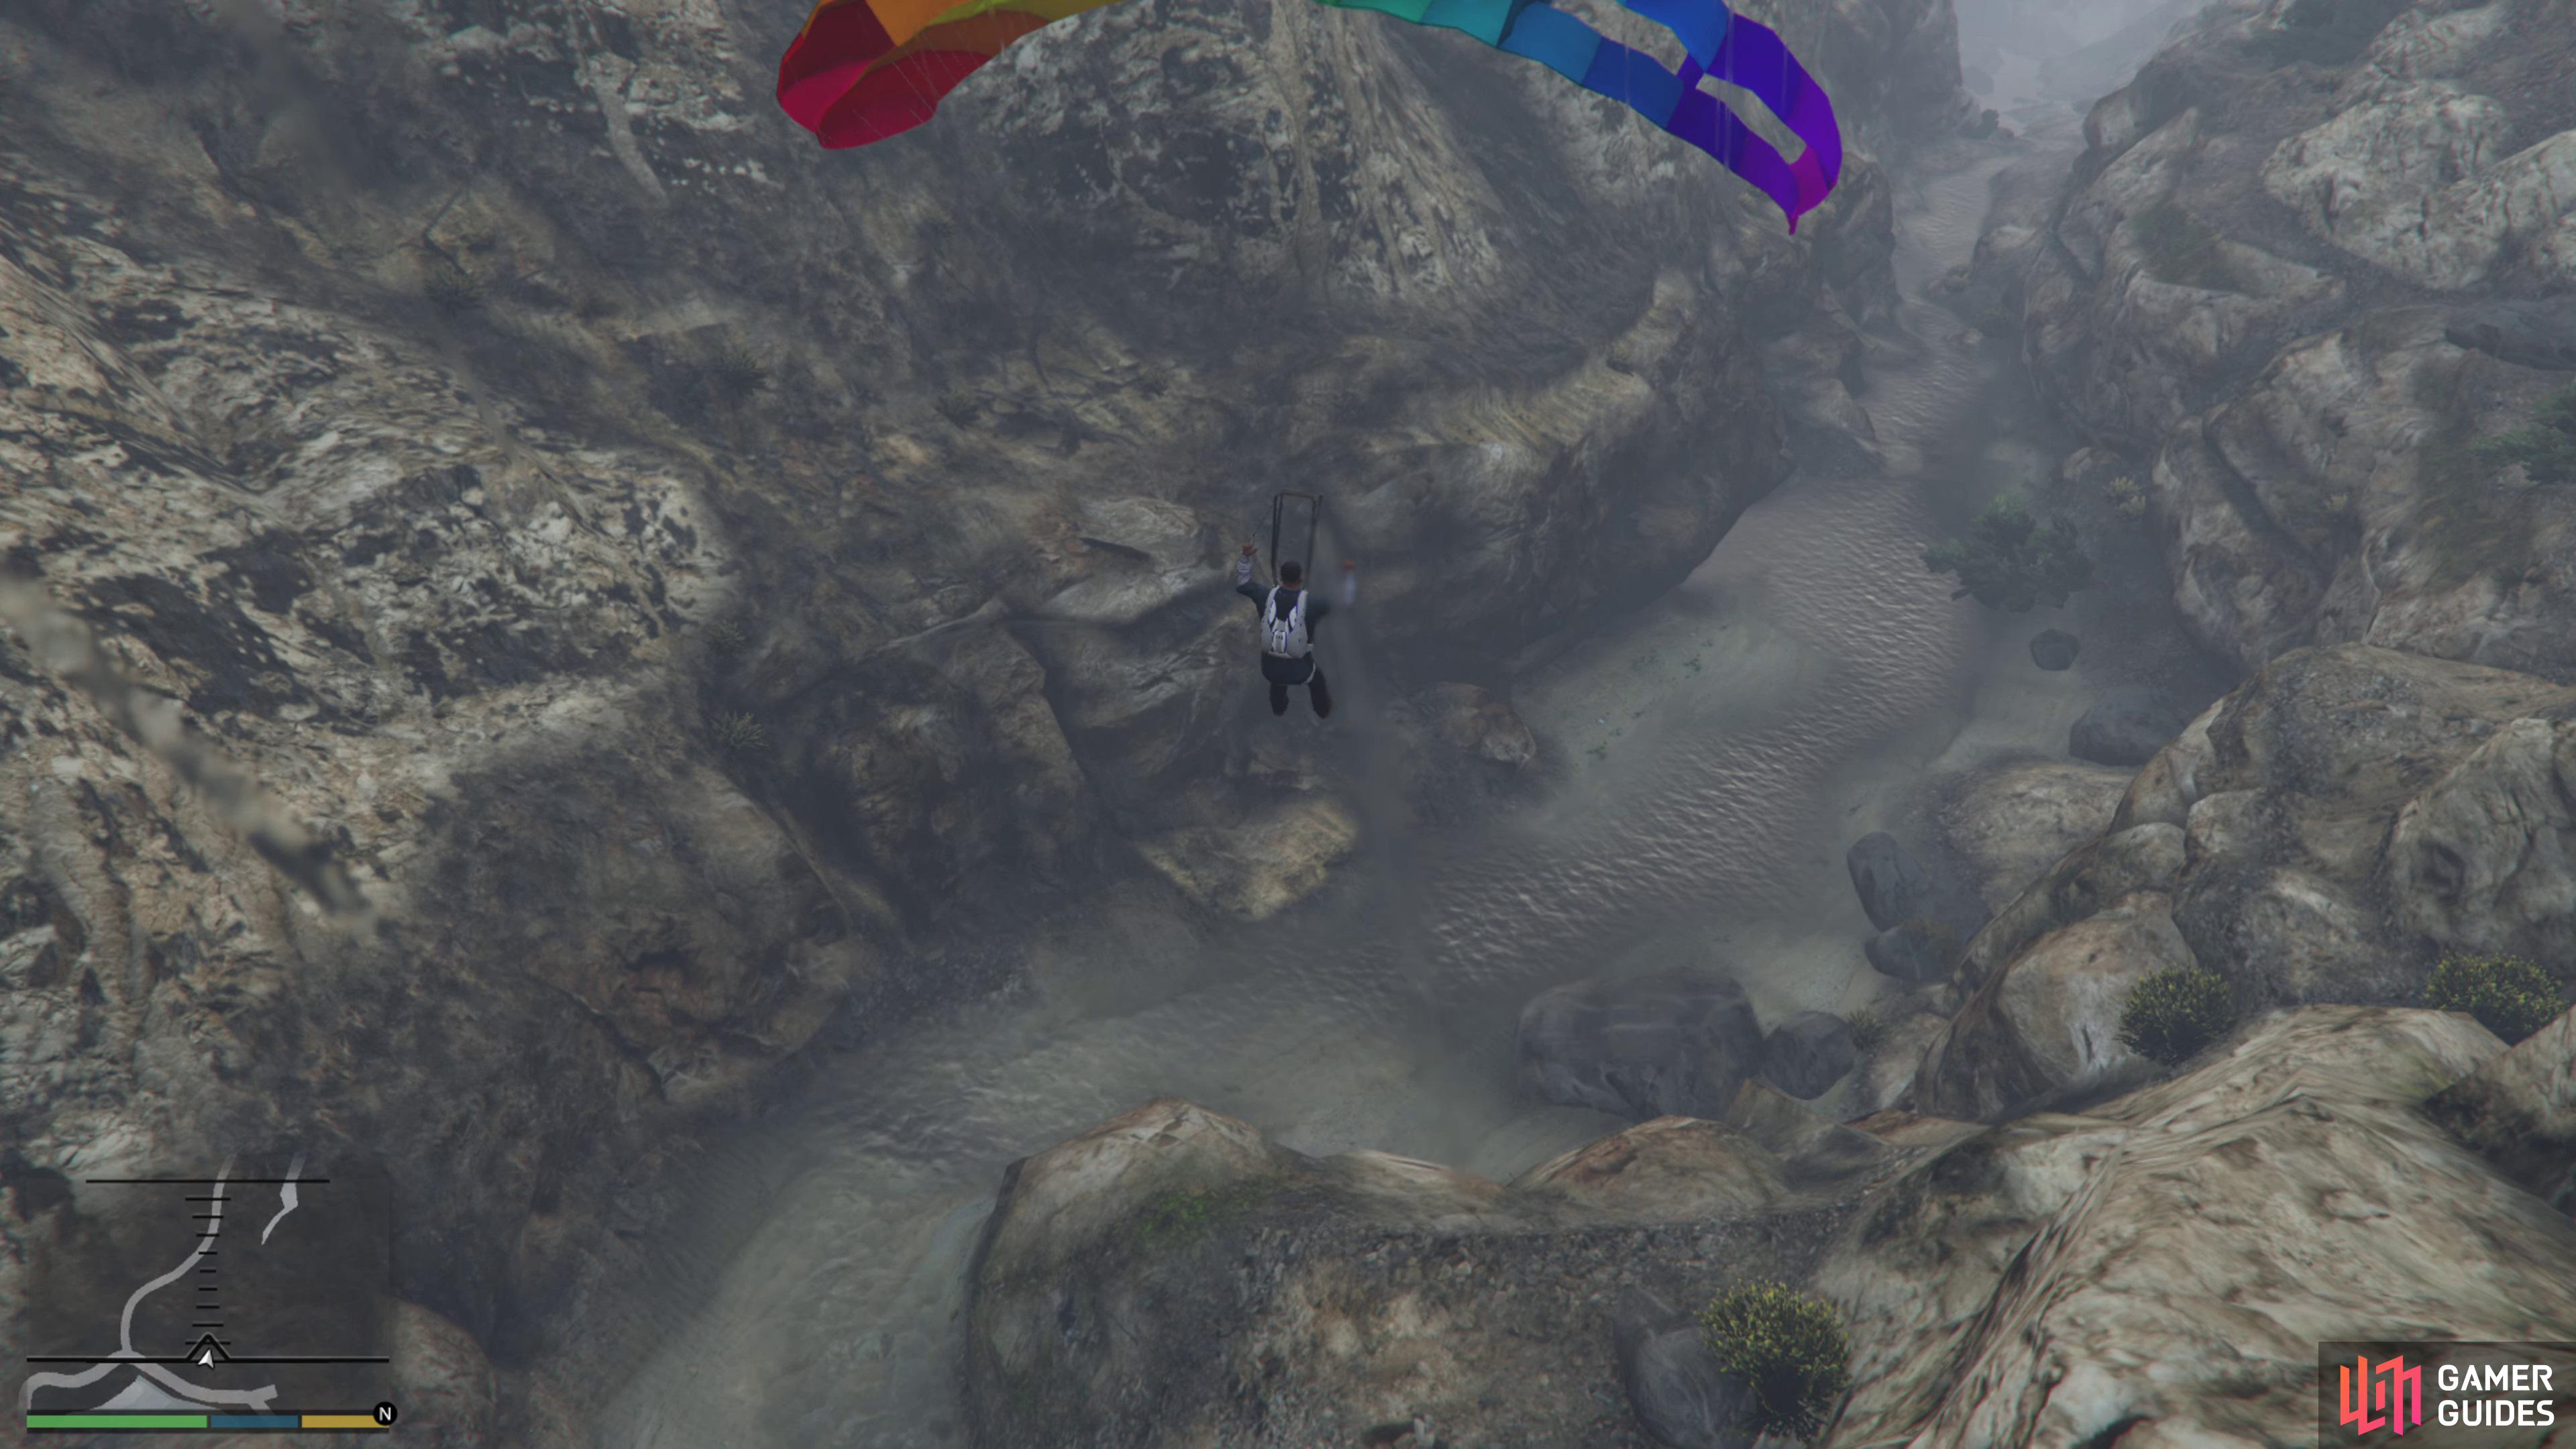 then open the chute as soon as you jump and try not to whack into the cliffs on both sides. Glide down the riverbed and land gently to complete this mission